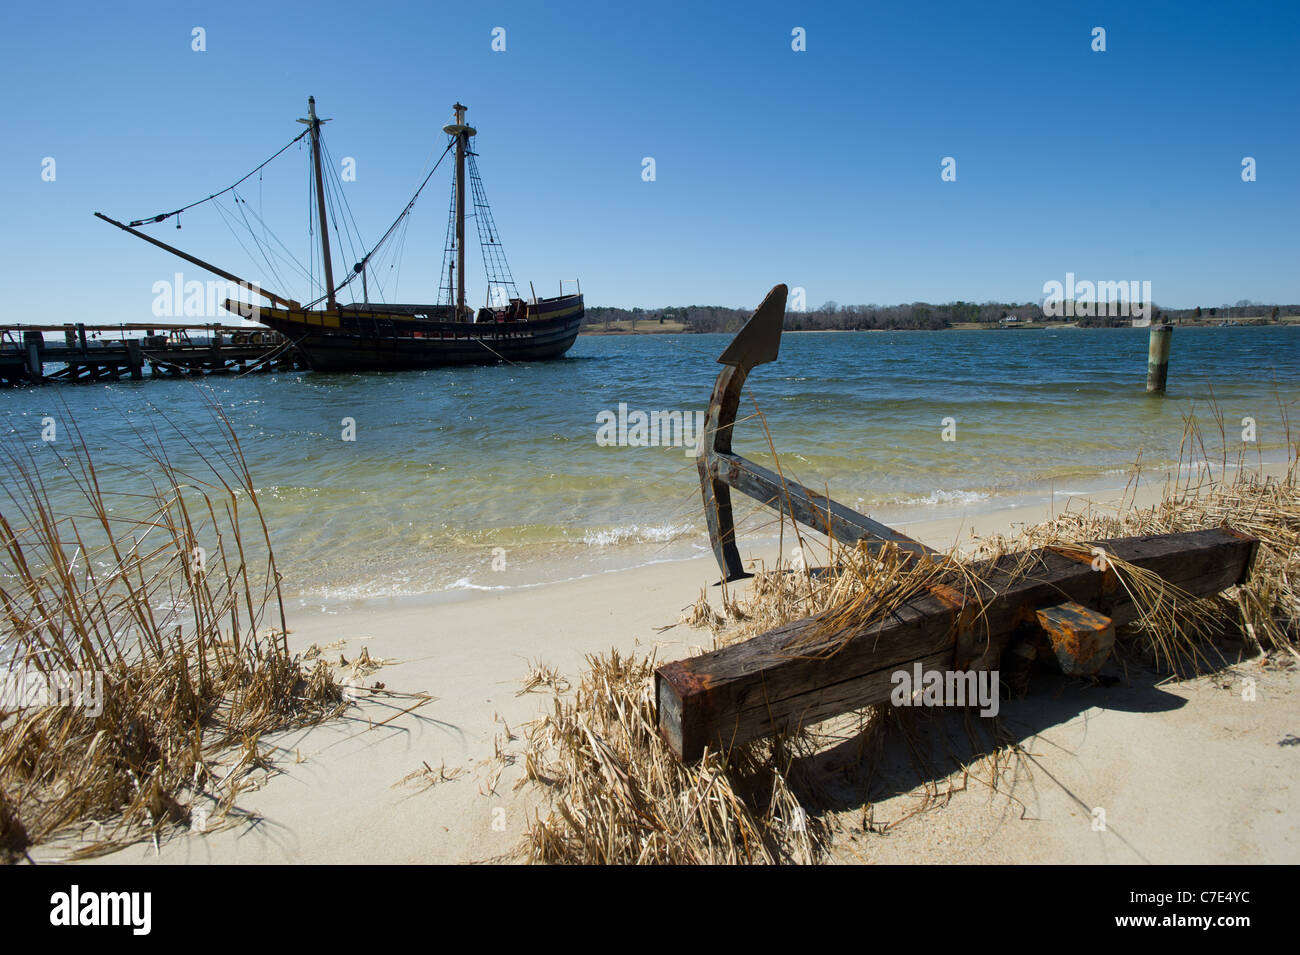 Anchor on a beach with ship docked in background Stock Photo